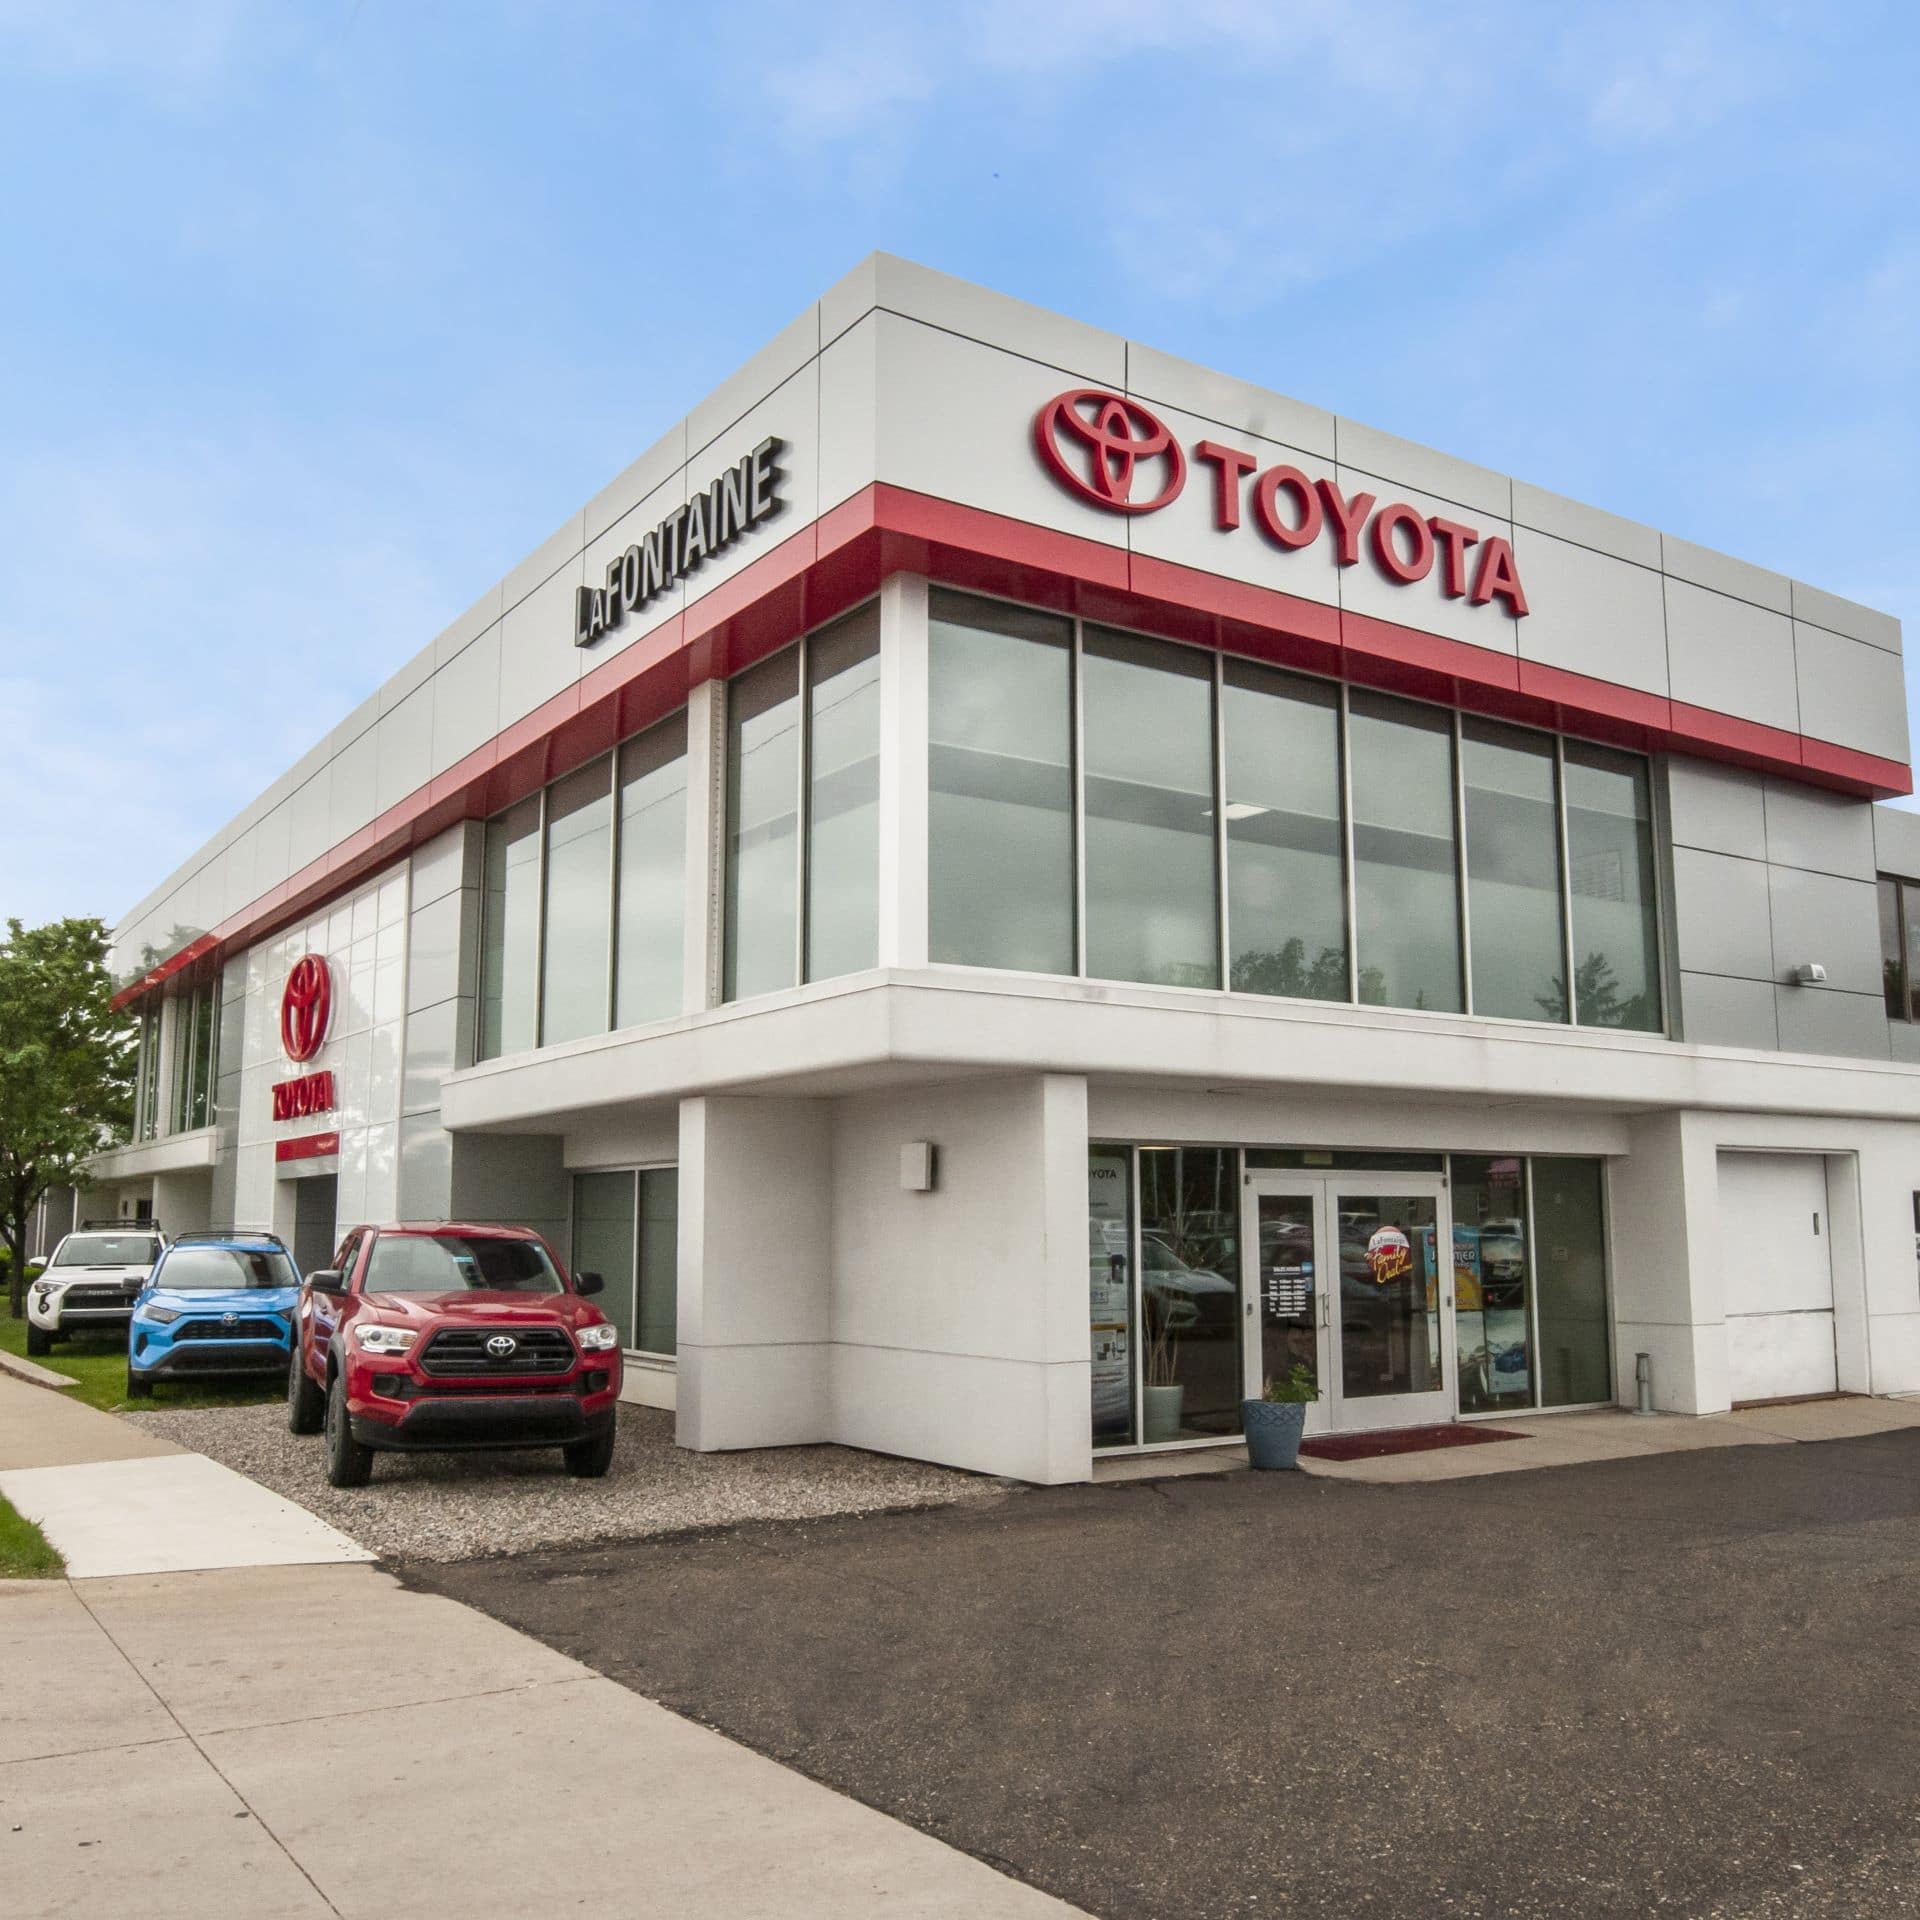 image of LaFontaine Toyota